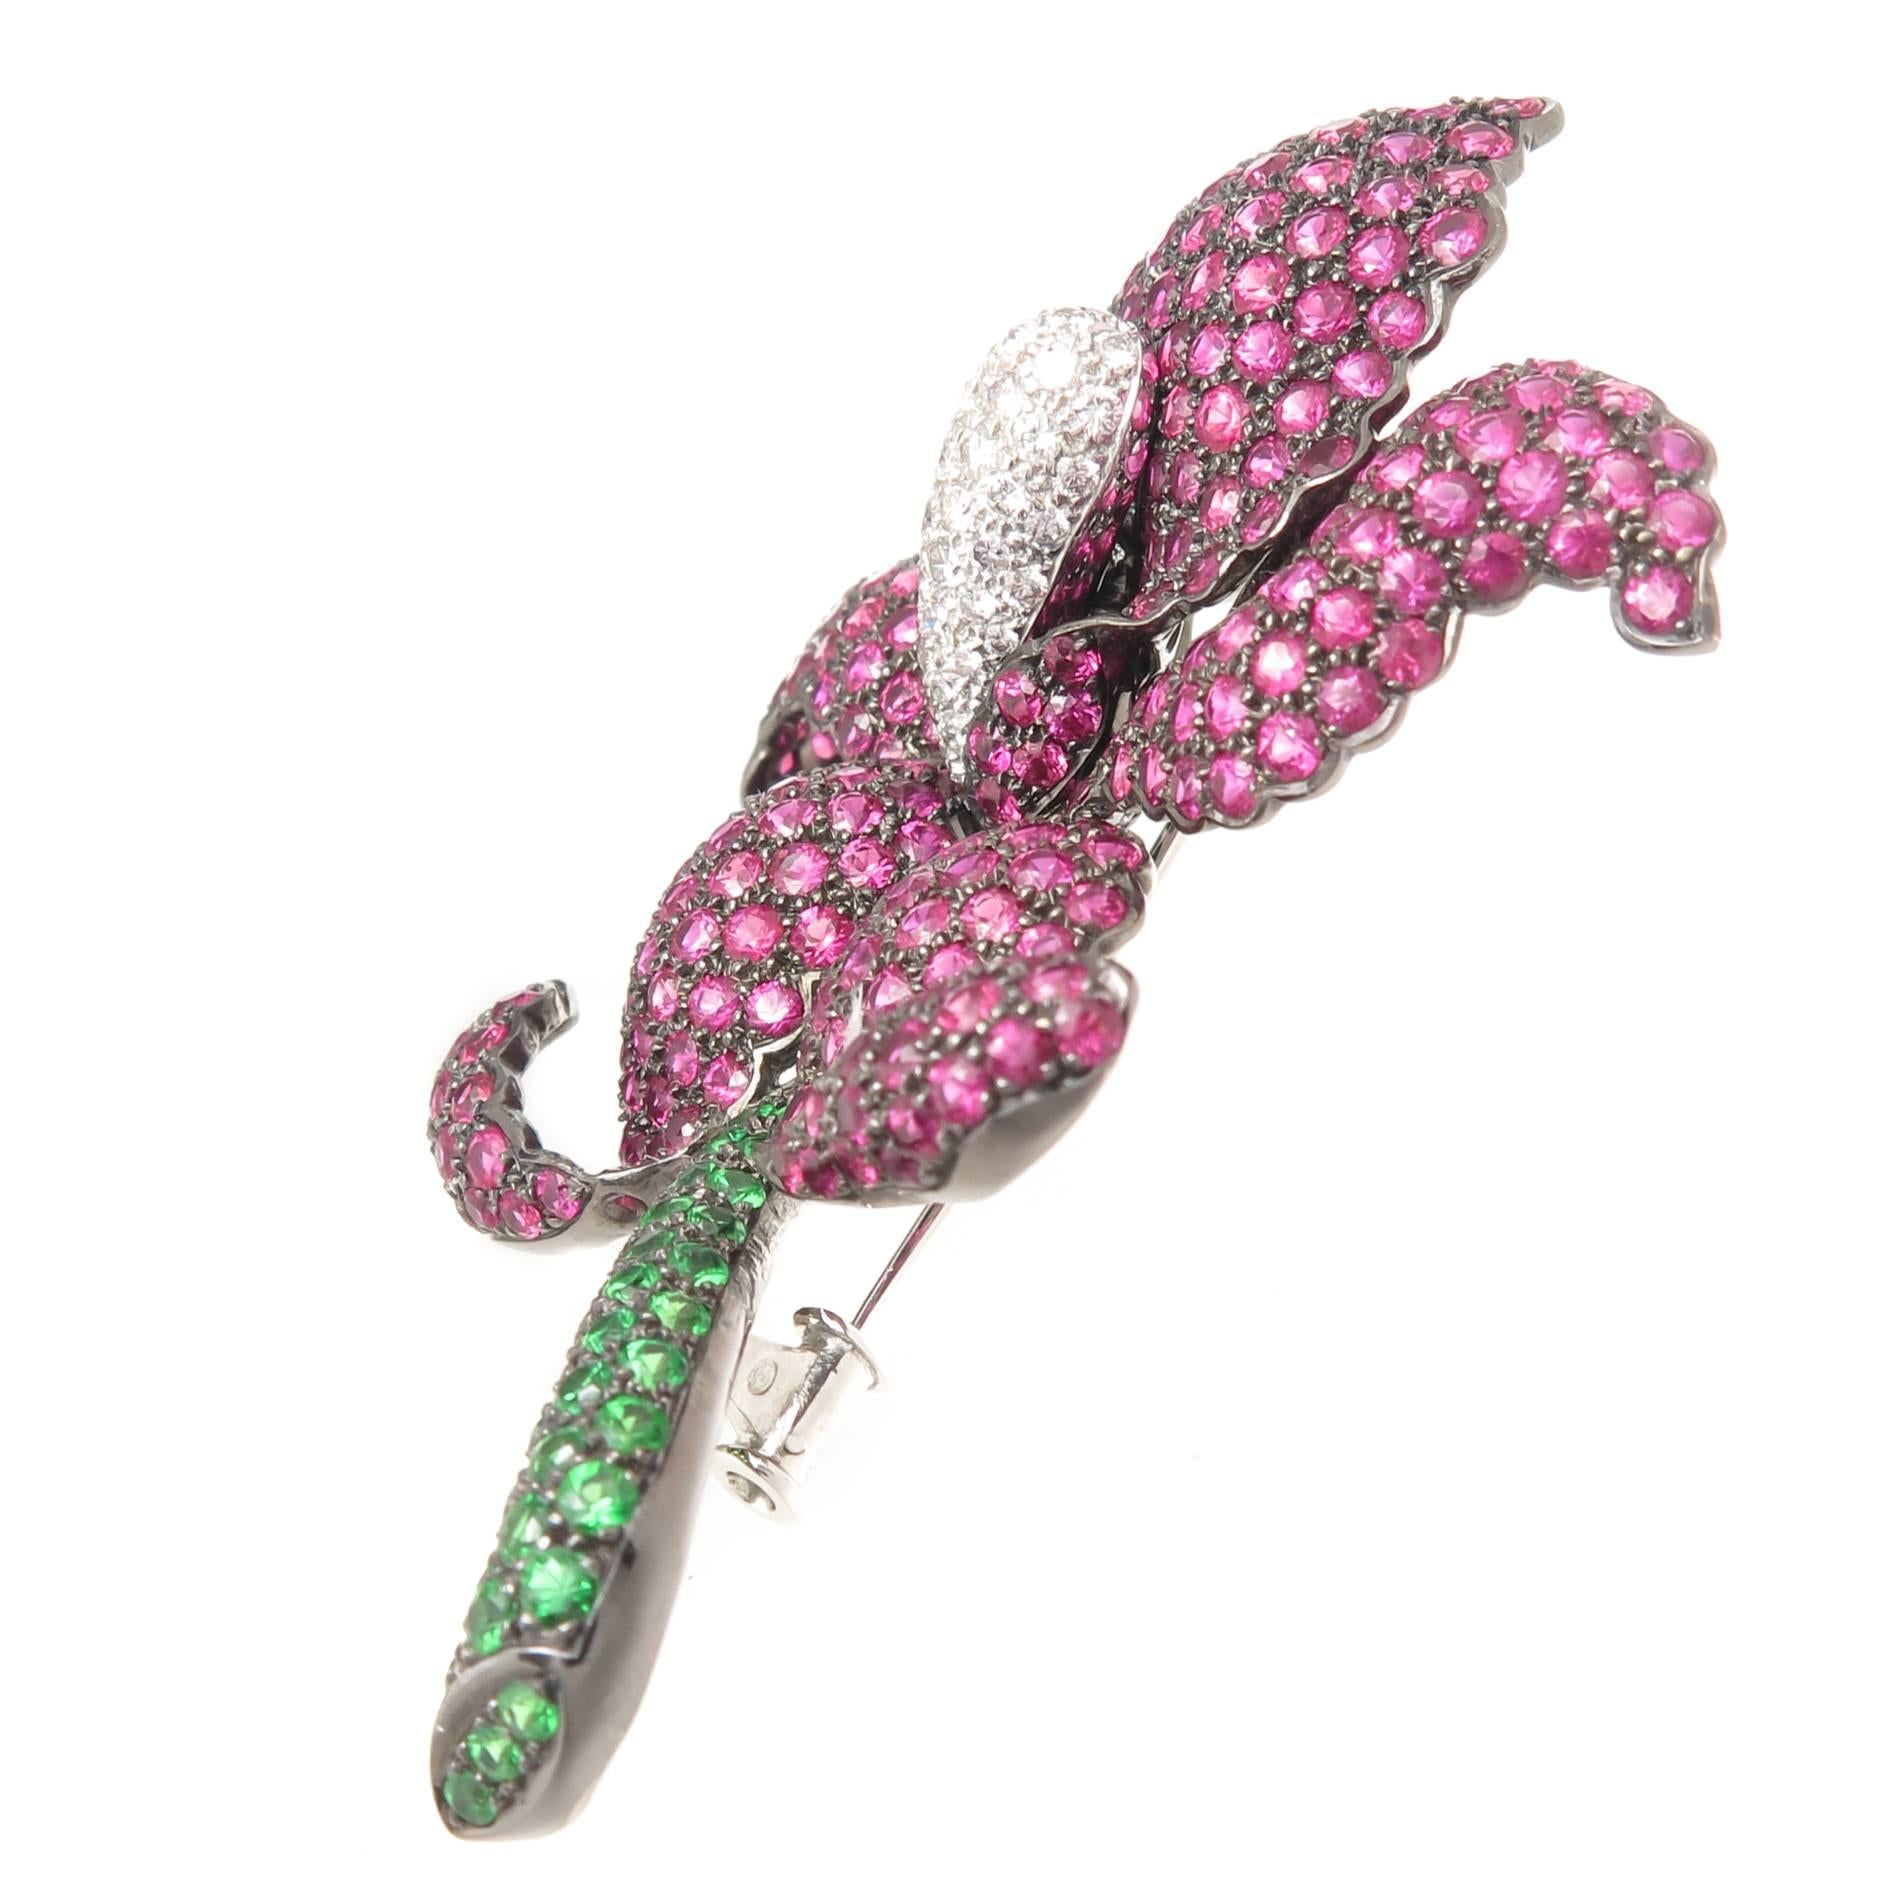 Circa 2010 18K Dark rhodium finished Gold Orchid Flower Brooch, measuring 2 3/4 inch in length and 2 inch wide. Set with Round Brilliant cut Rubies of fine bright color and totaling approximately 10 Carats, a stem of fine color Green Tsavorite